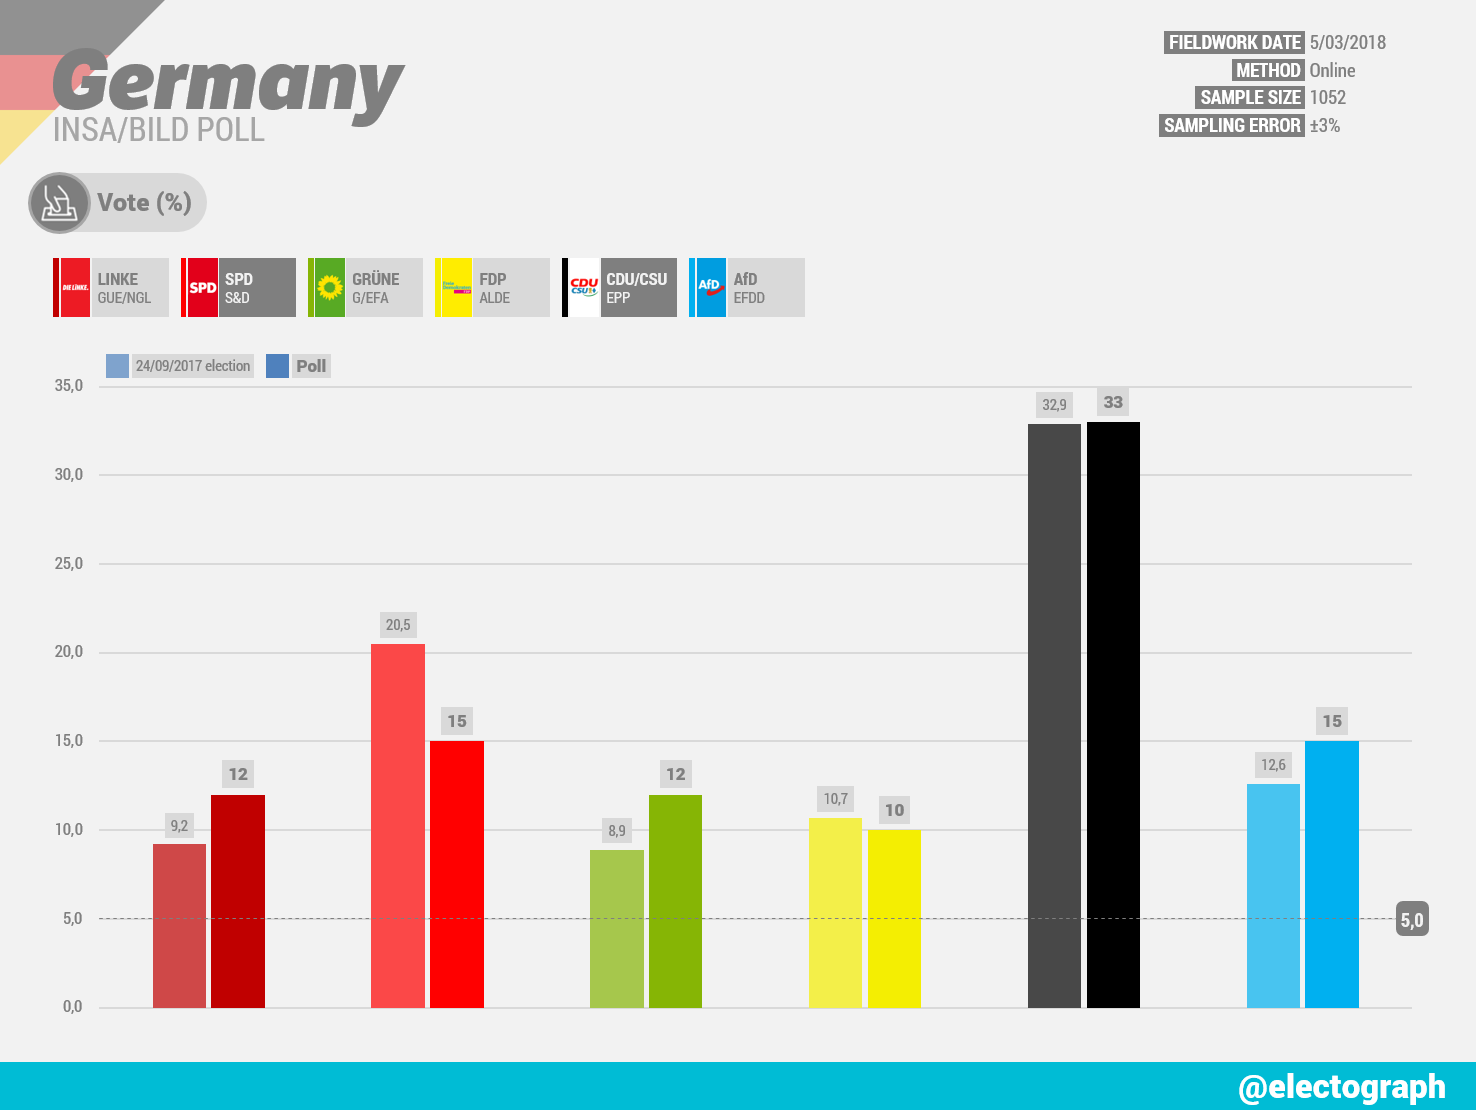 GERMANY INSA poll chart for Bild, March 2018